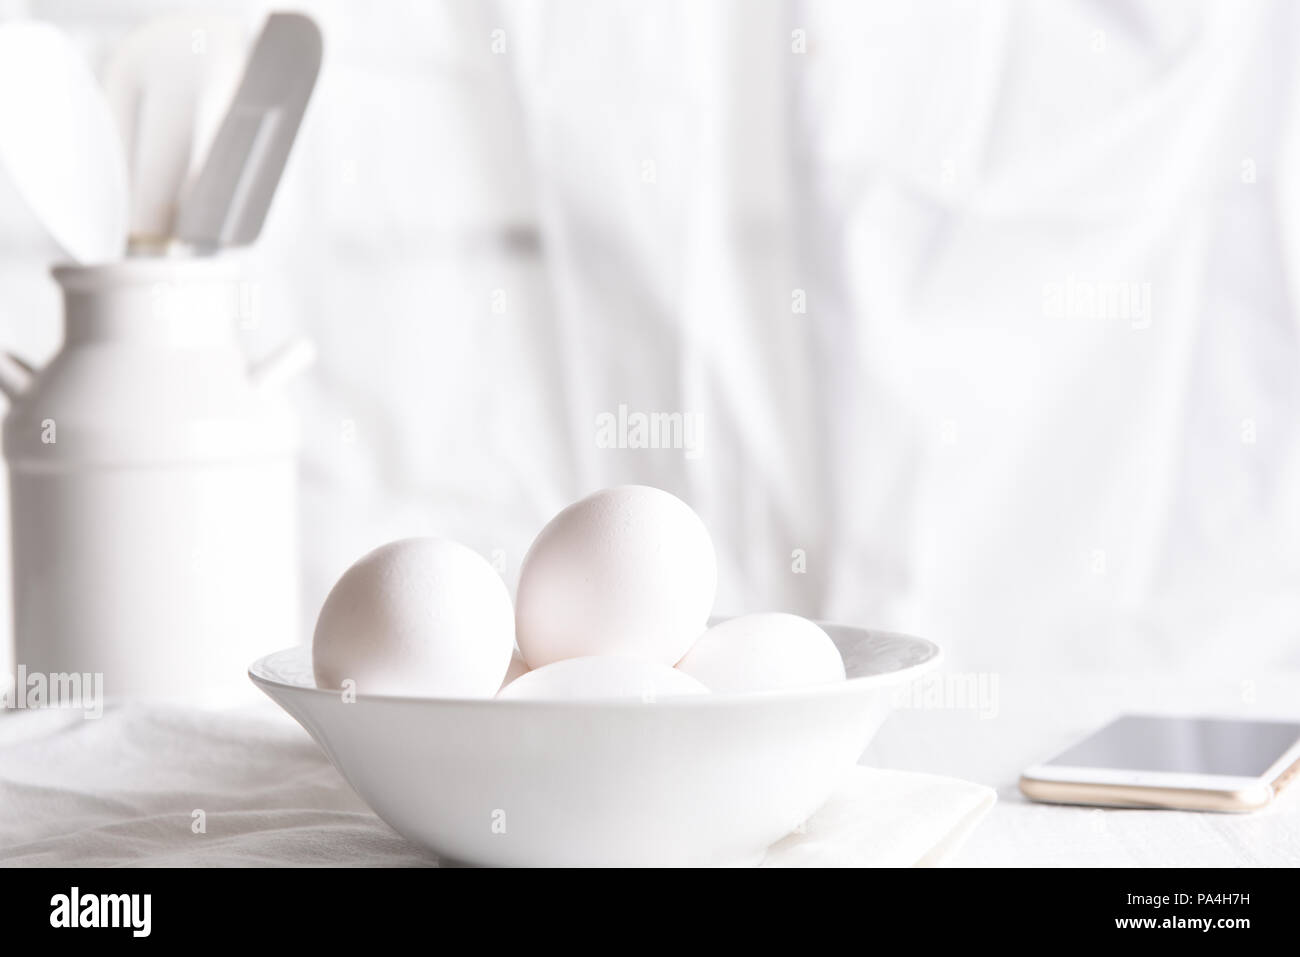 High Key Egg Still Life: Fresh eggs in a white bowl in front of a window with white curtains. Horizontal orientation. Stock Photo